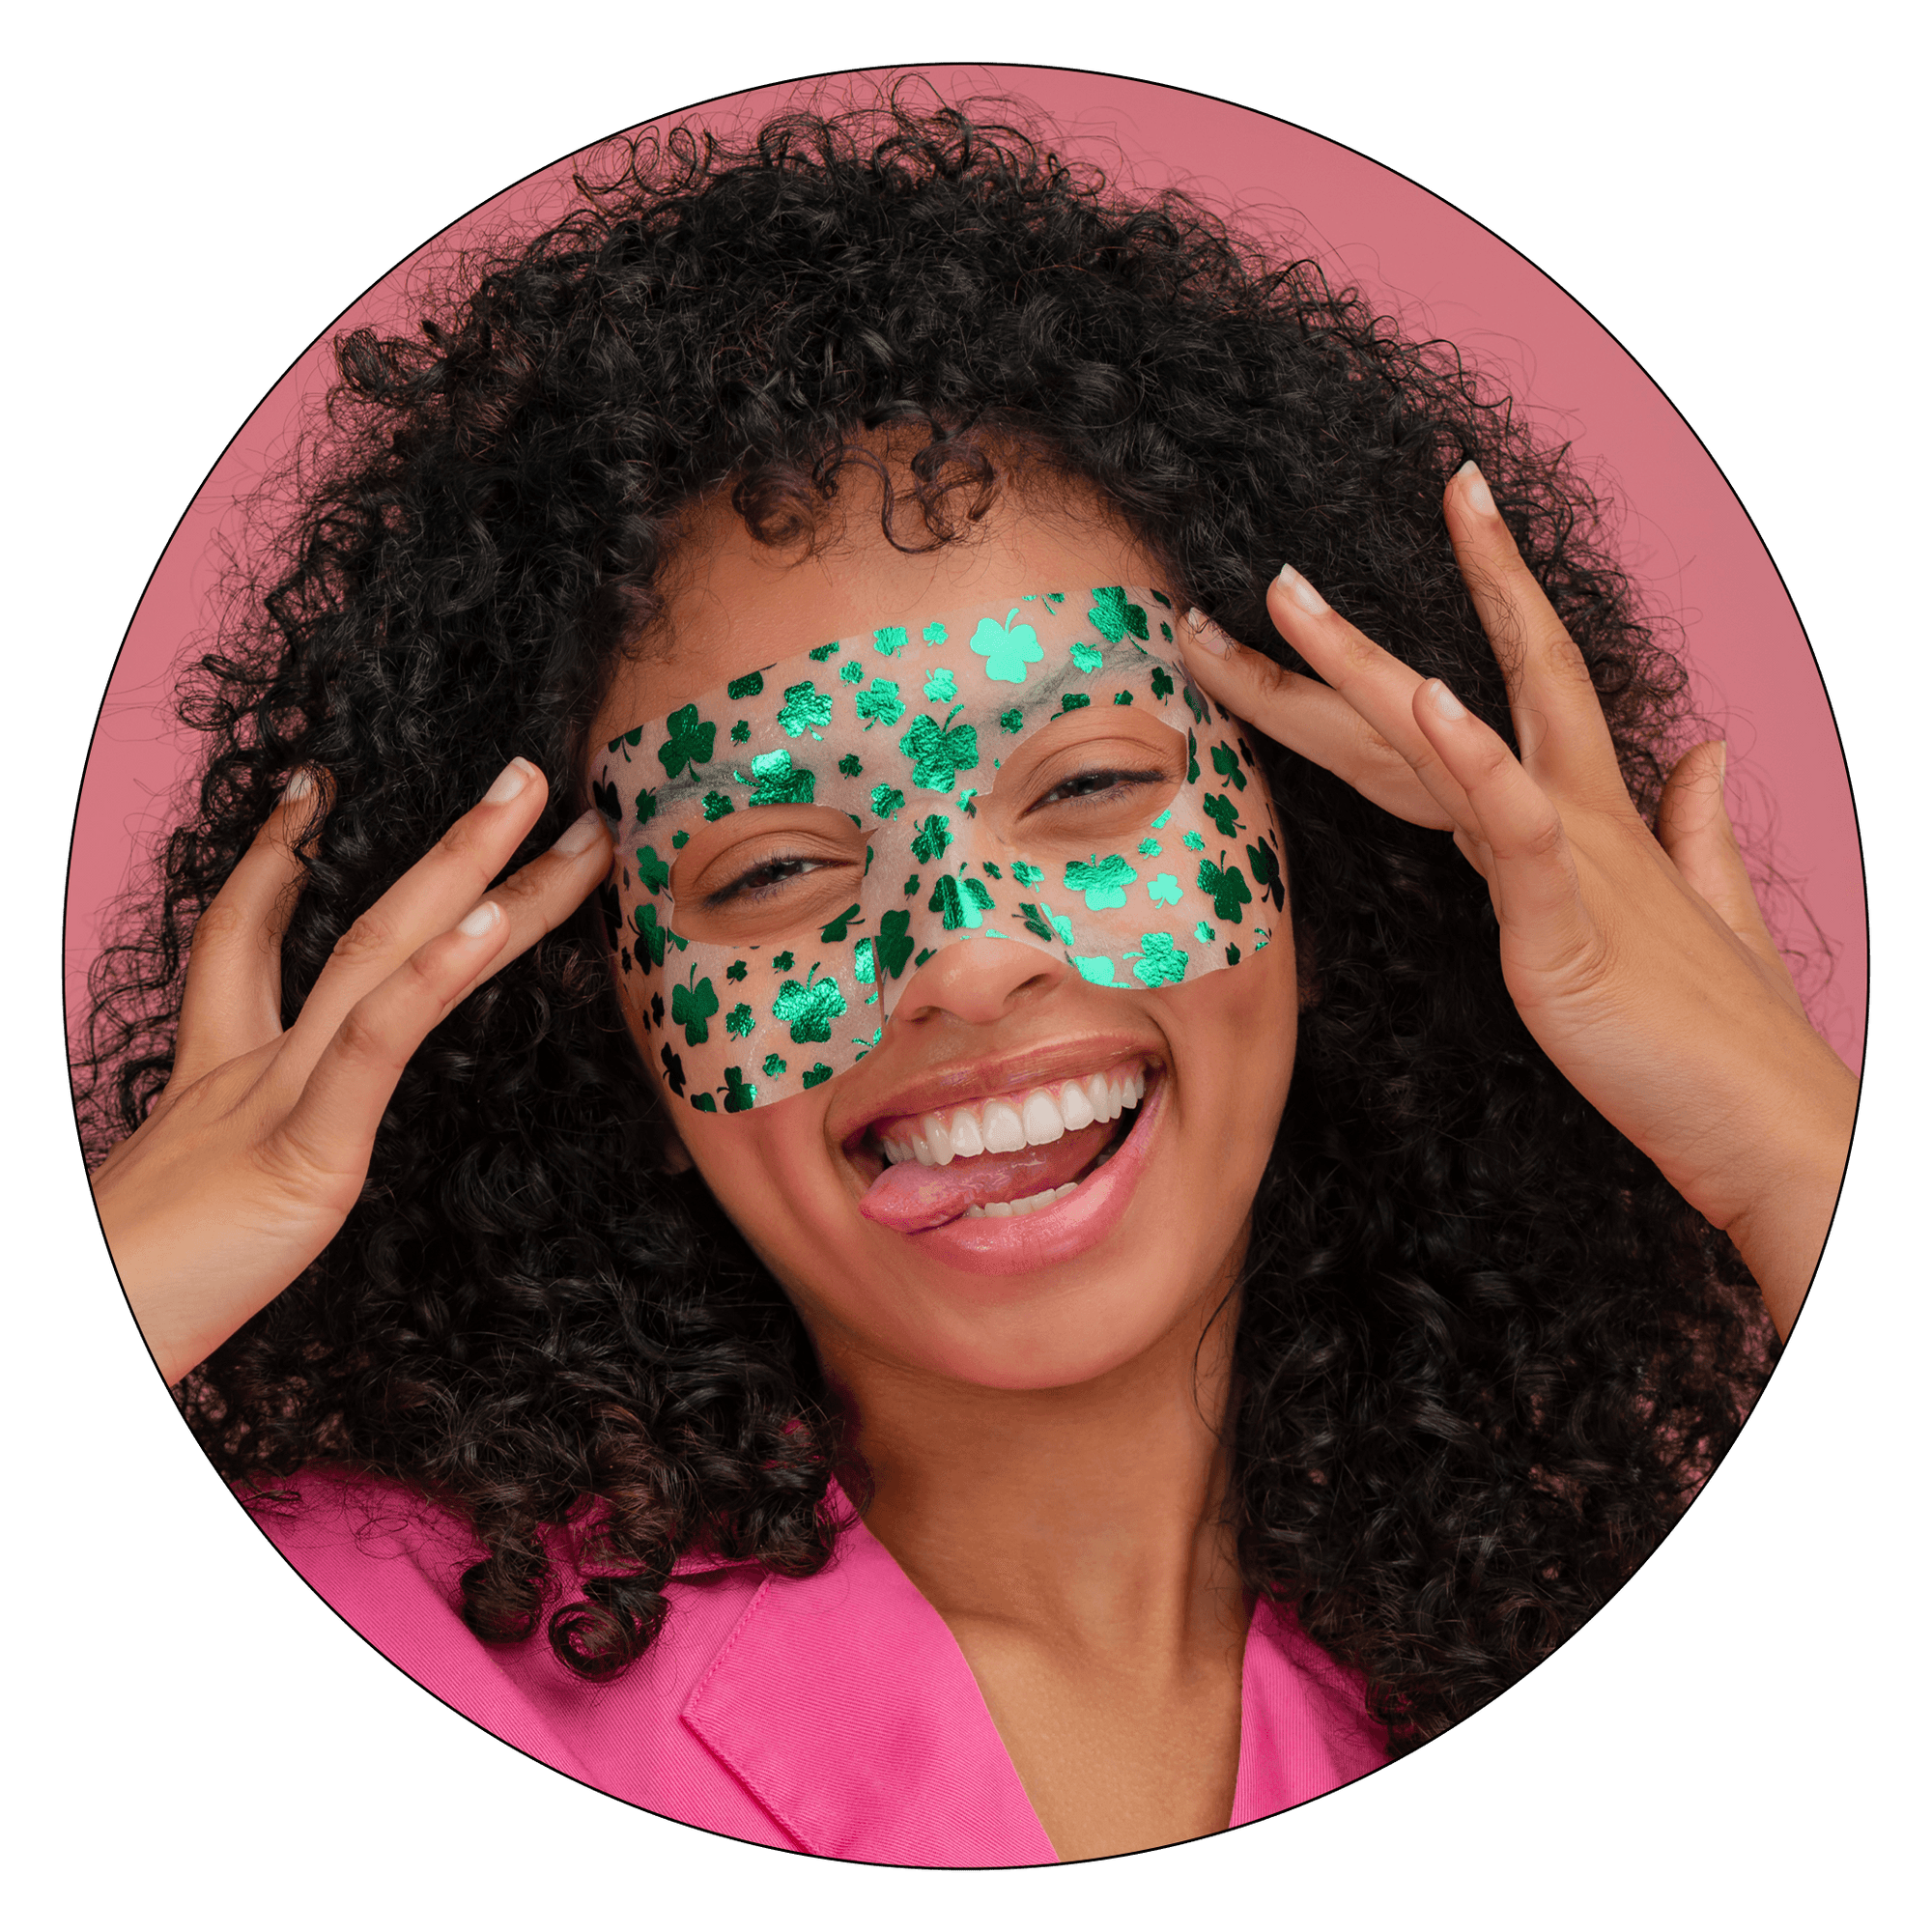 Lucky Clover Eye Day Bright Goggle Eye Mask - Vitamasques